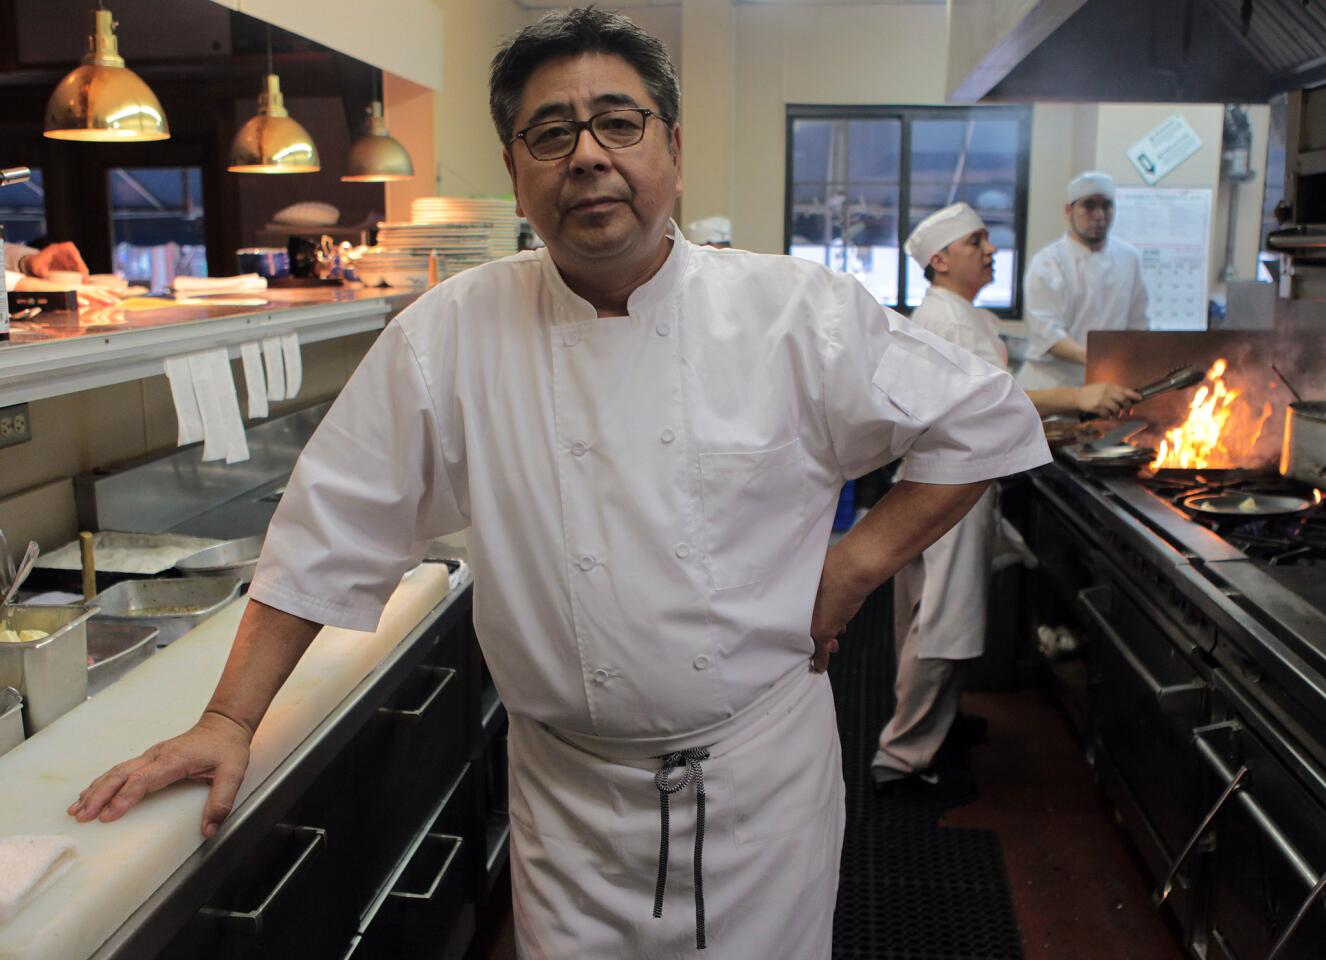 Chef Yoshi Katsumura, whose 33-year-old restaurant, Yoshi's Cafe, was one of the most important restaurants in Lakeview, passed away Aug. 2, 2015 at age 65, following a long battle with cancer.